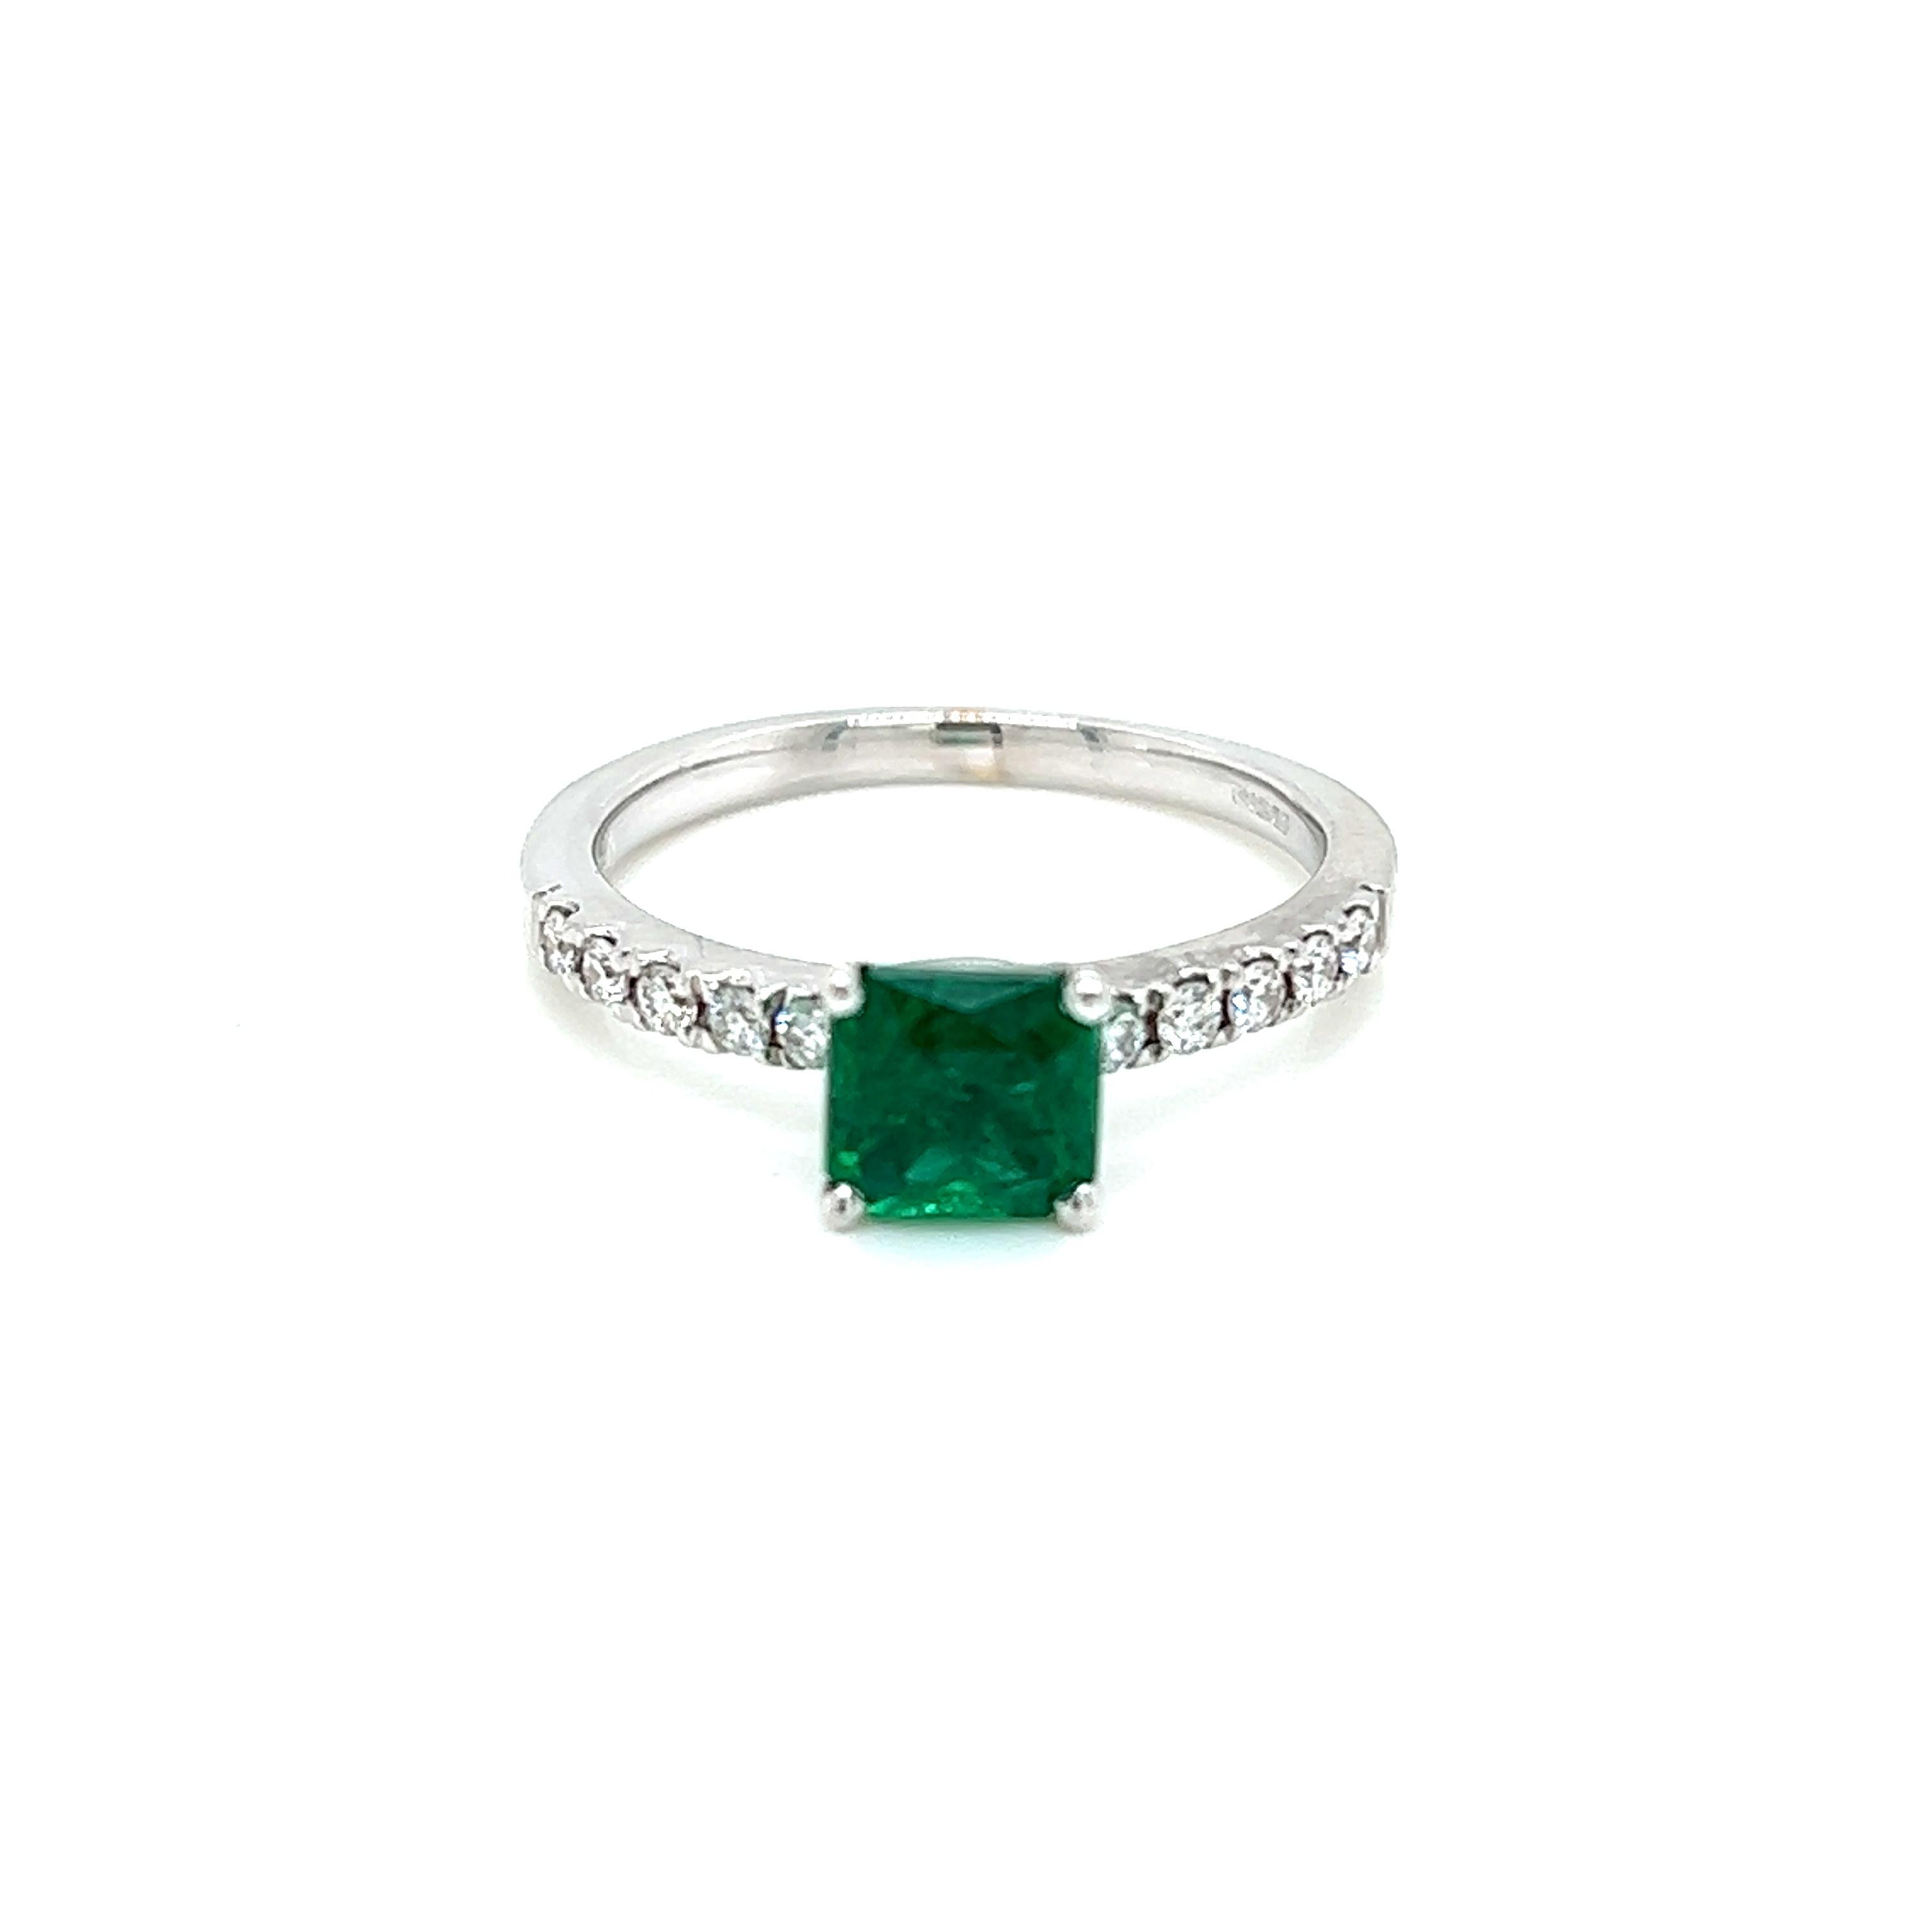 0.83 Carat Square cut Emerald and Diamond Ring in 18 Karat White Gold

This exquisite ring features a luscious Emerald held in a claw setting on a Diamond encrusted 18K White Gold band.

The resplendent jewel at the centre of this ring is square cut